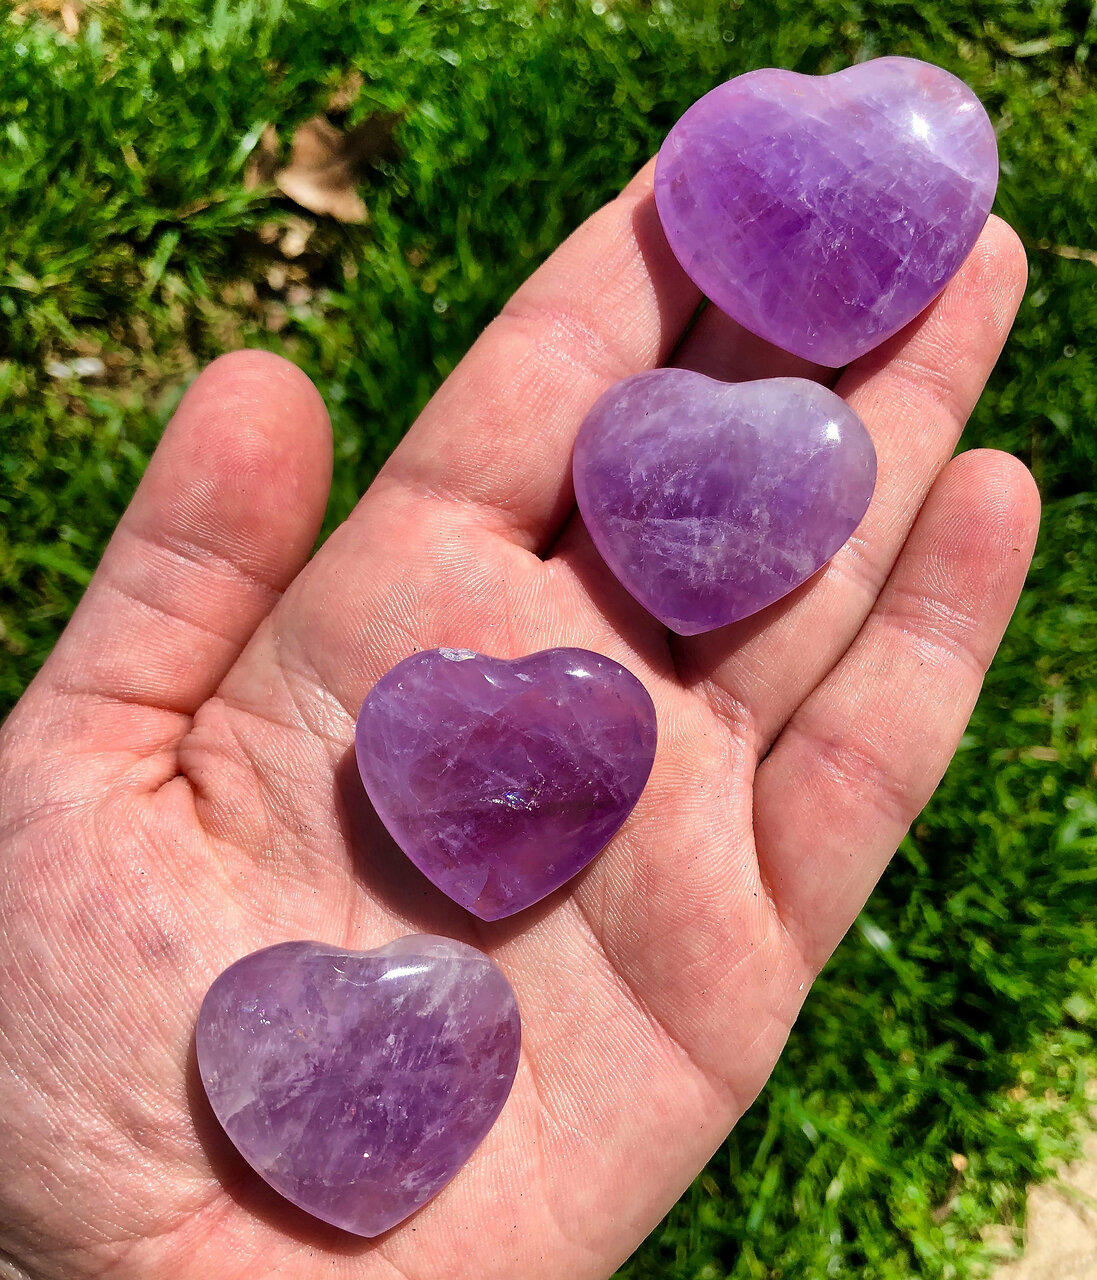 Details about   Natural Dream Amethyst Quartz heart Crystal Double Point Healing 1pc